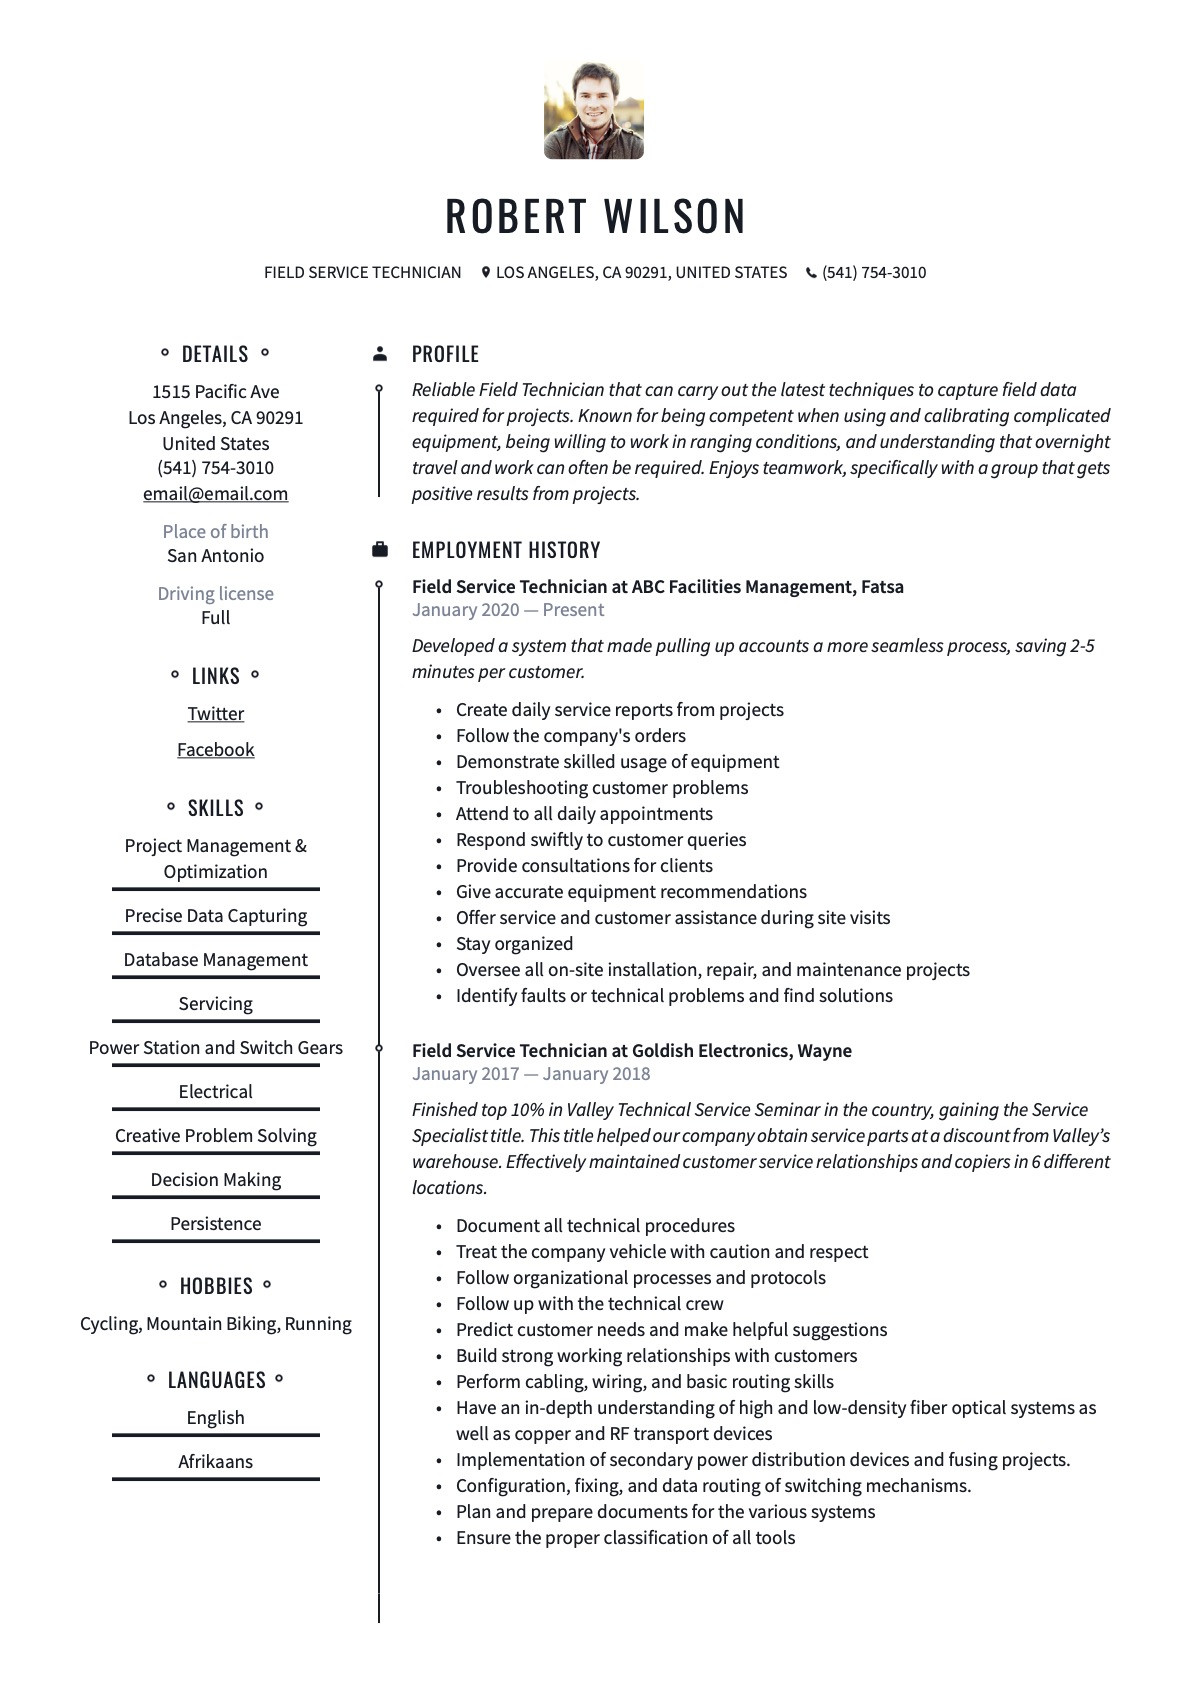 Sample Resume for Utility and Maintenance Engineer Field Service Technician Resume & Guide  20 Examples 2022